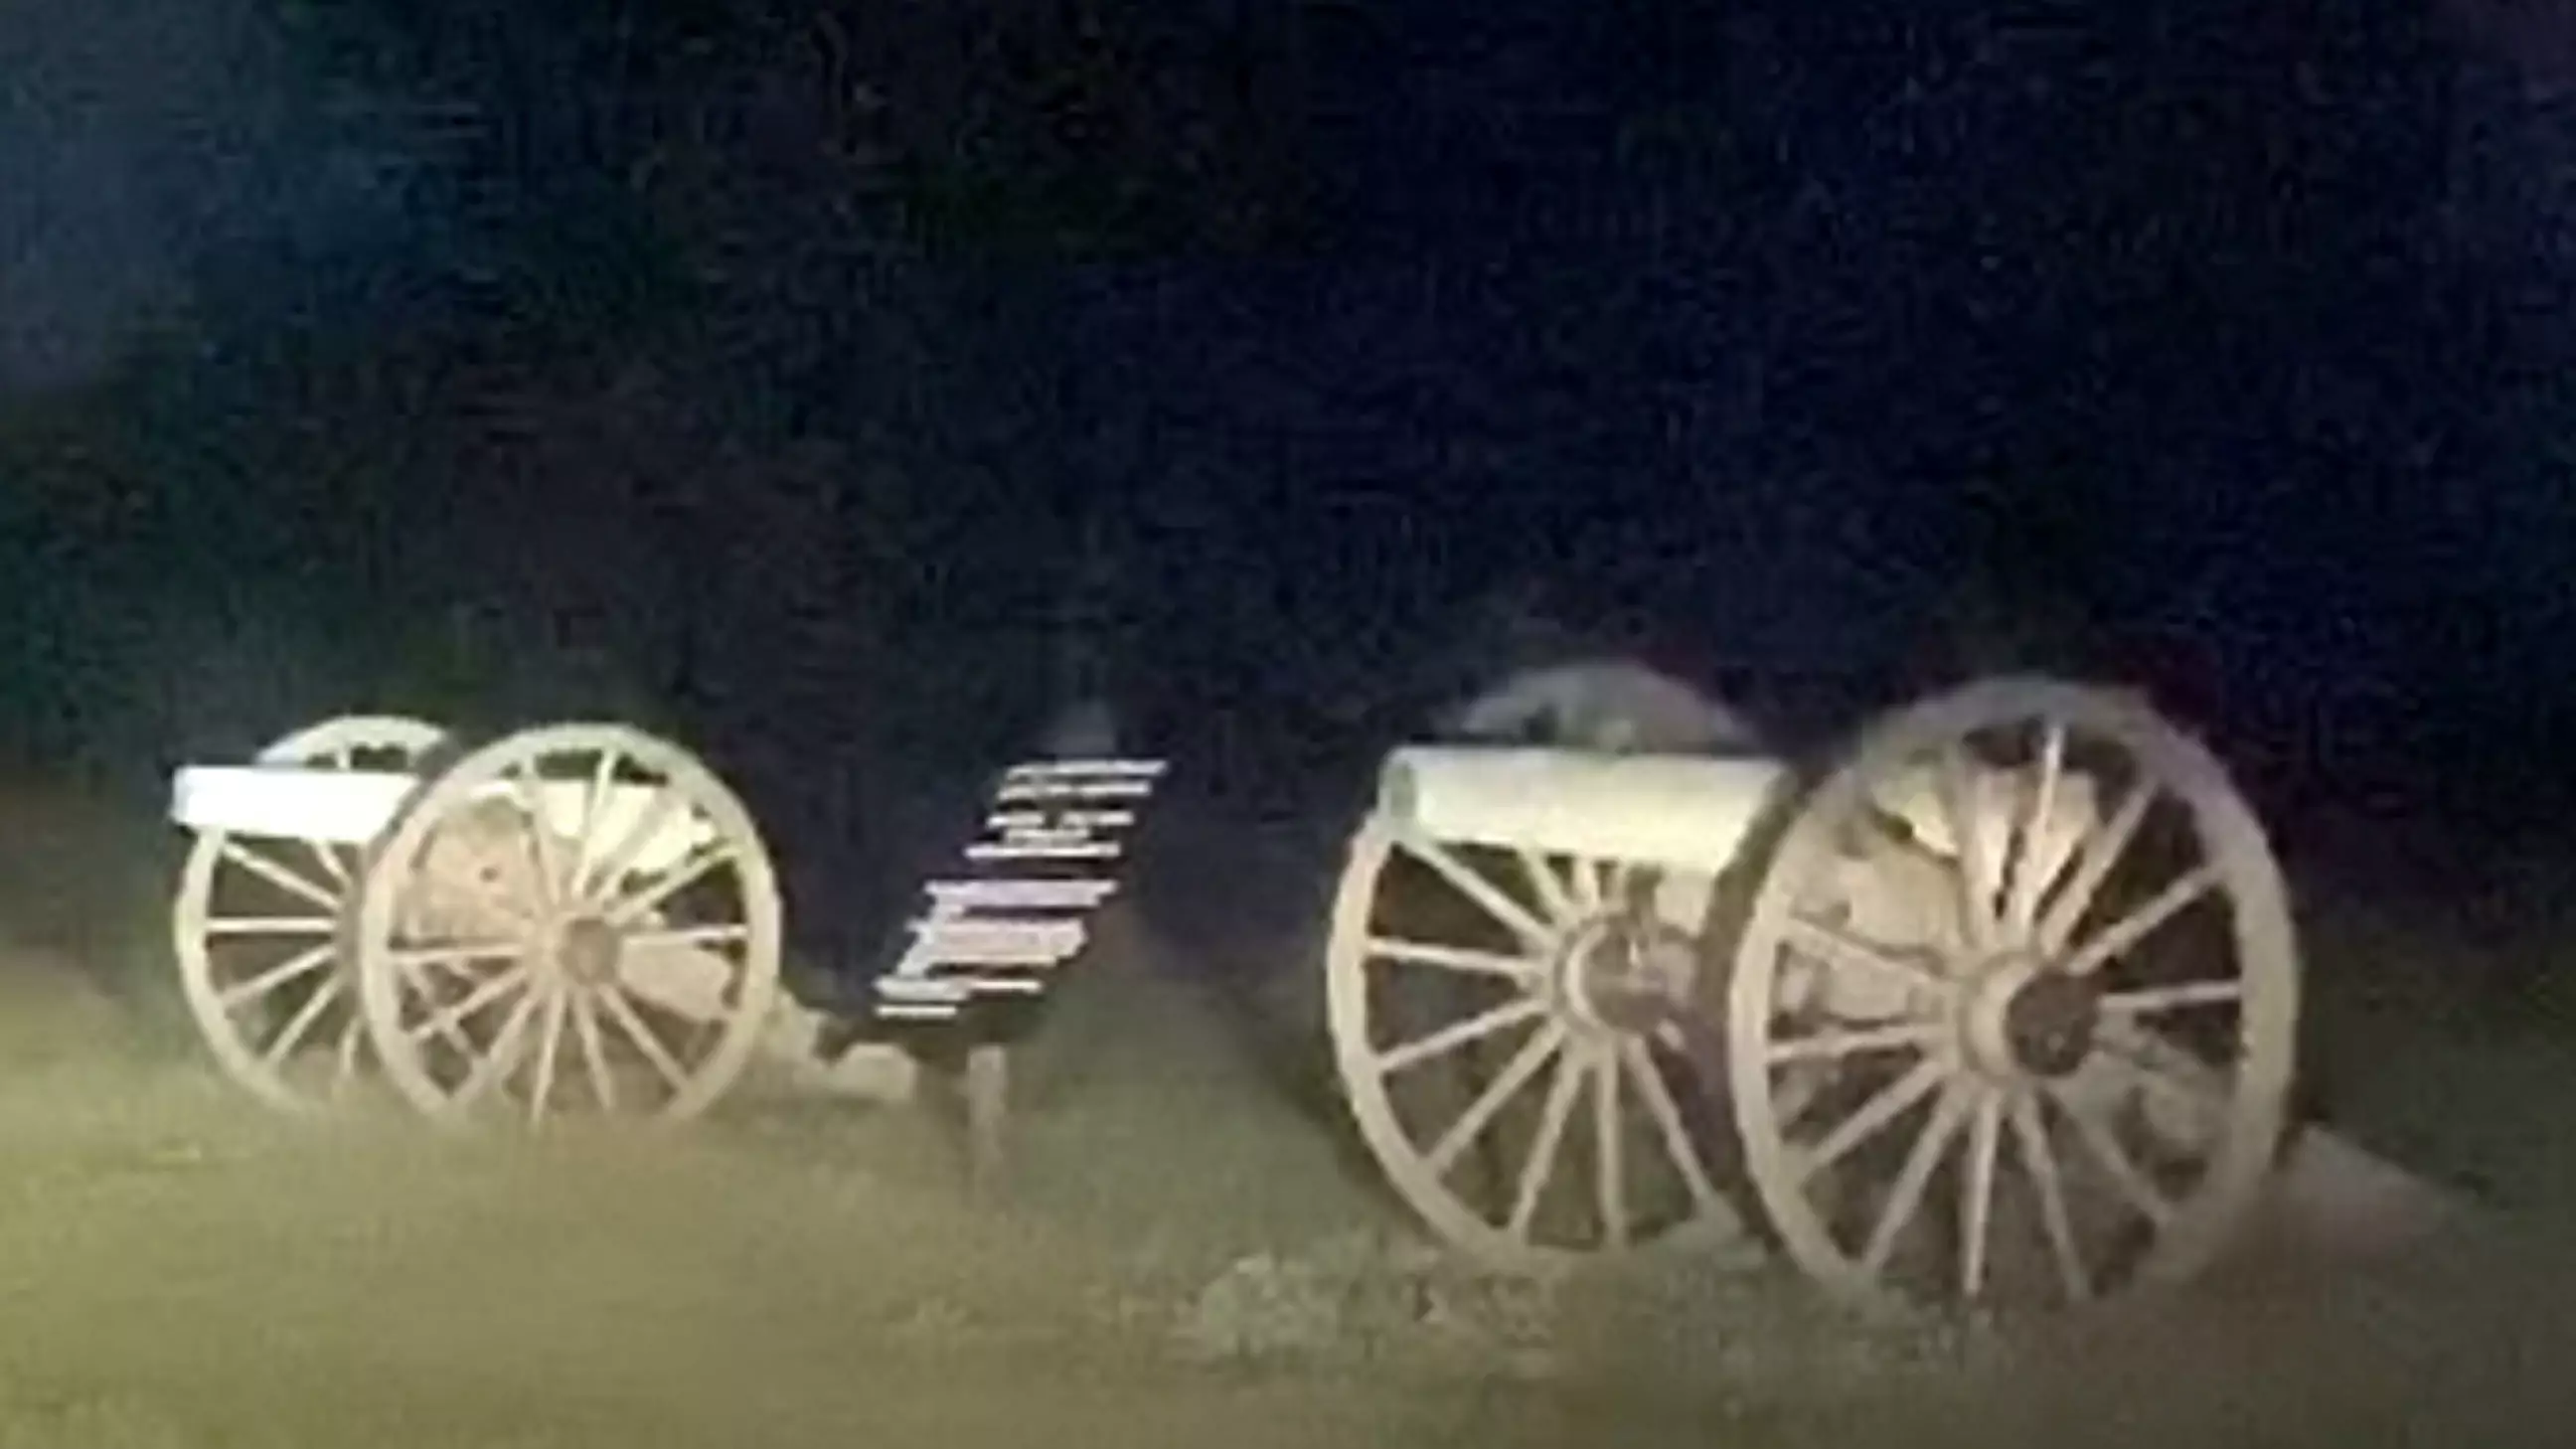 Tourists Spot Chilling 'Human-Sized' Apparitions At Gettysburg Site